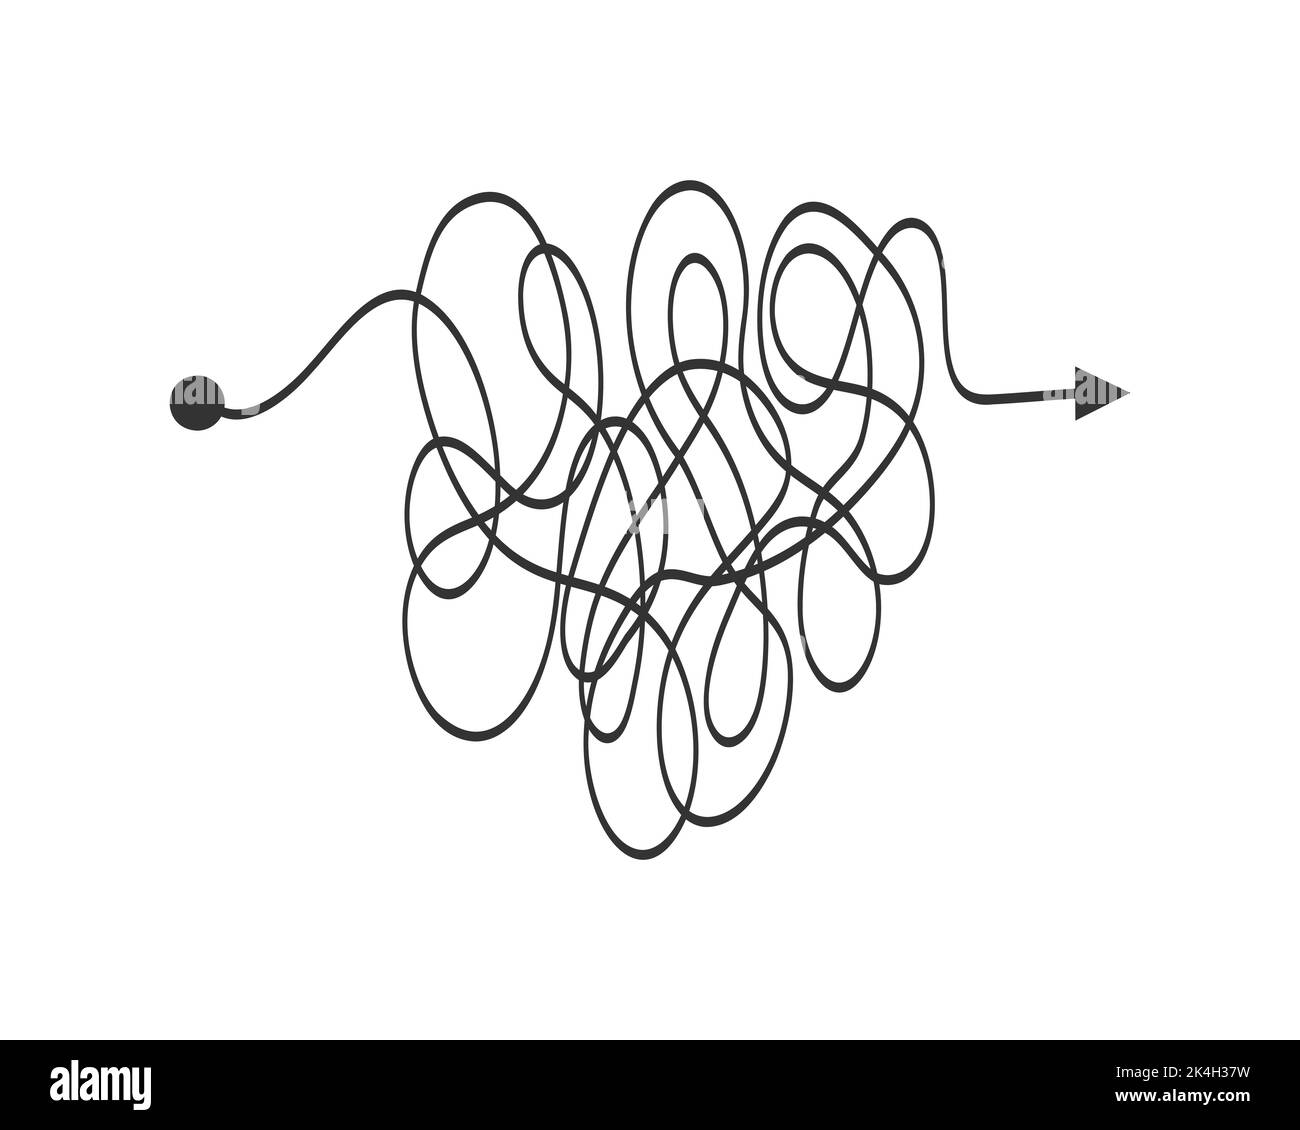 Chaotic line from start point to finish arrow. Complex problem solution concept. Brain work with new idea. Complexity sign. Vector graphic illustration Stock Vector